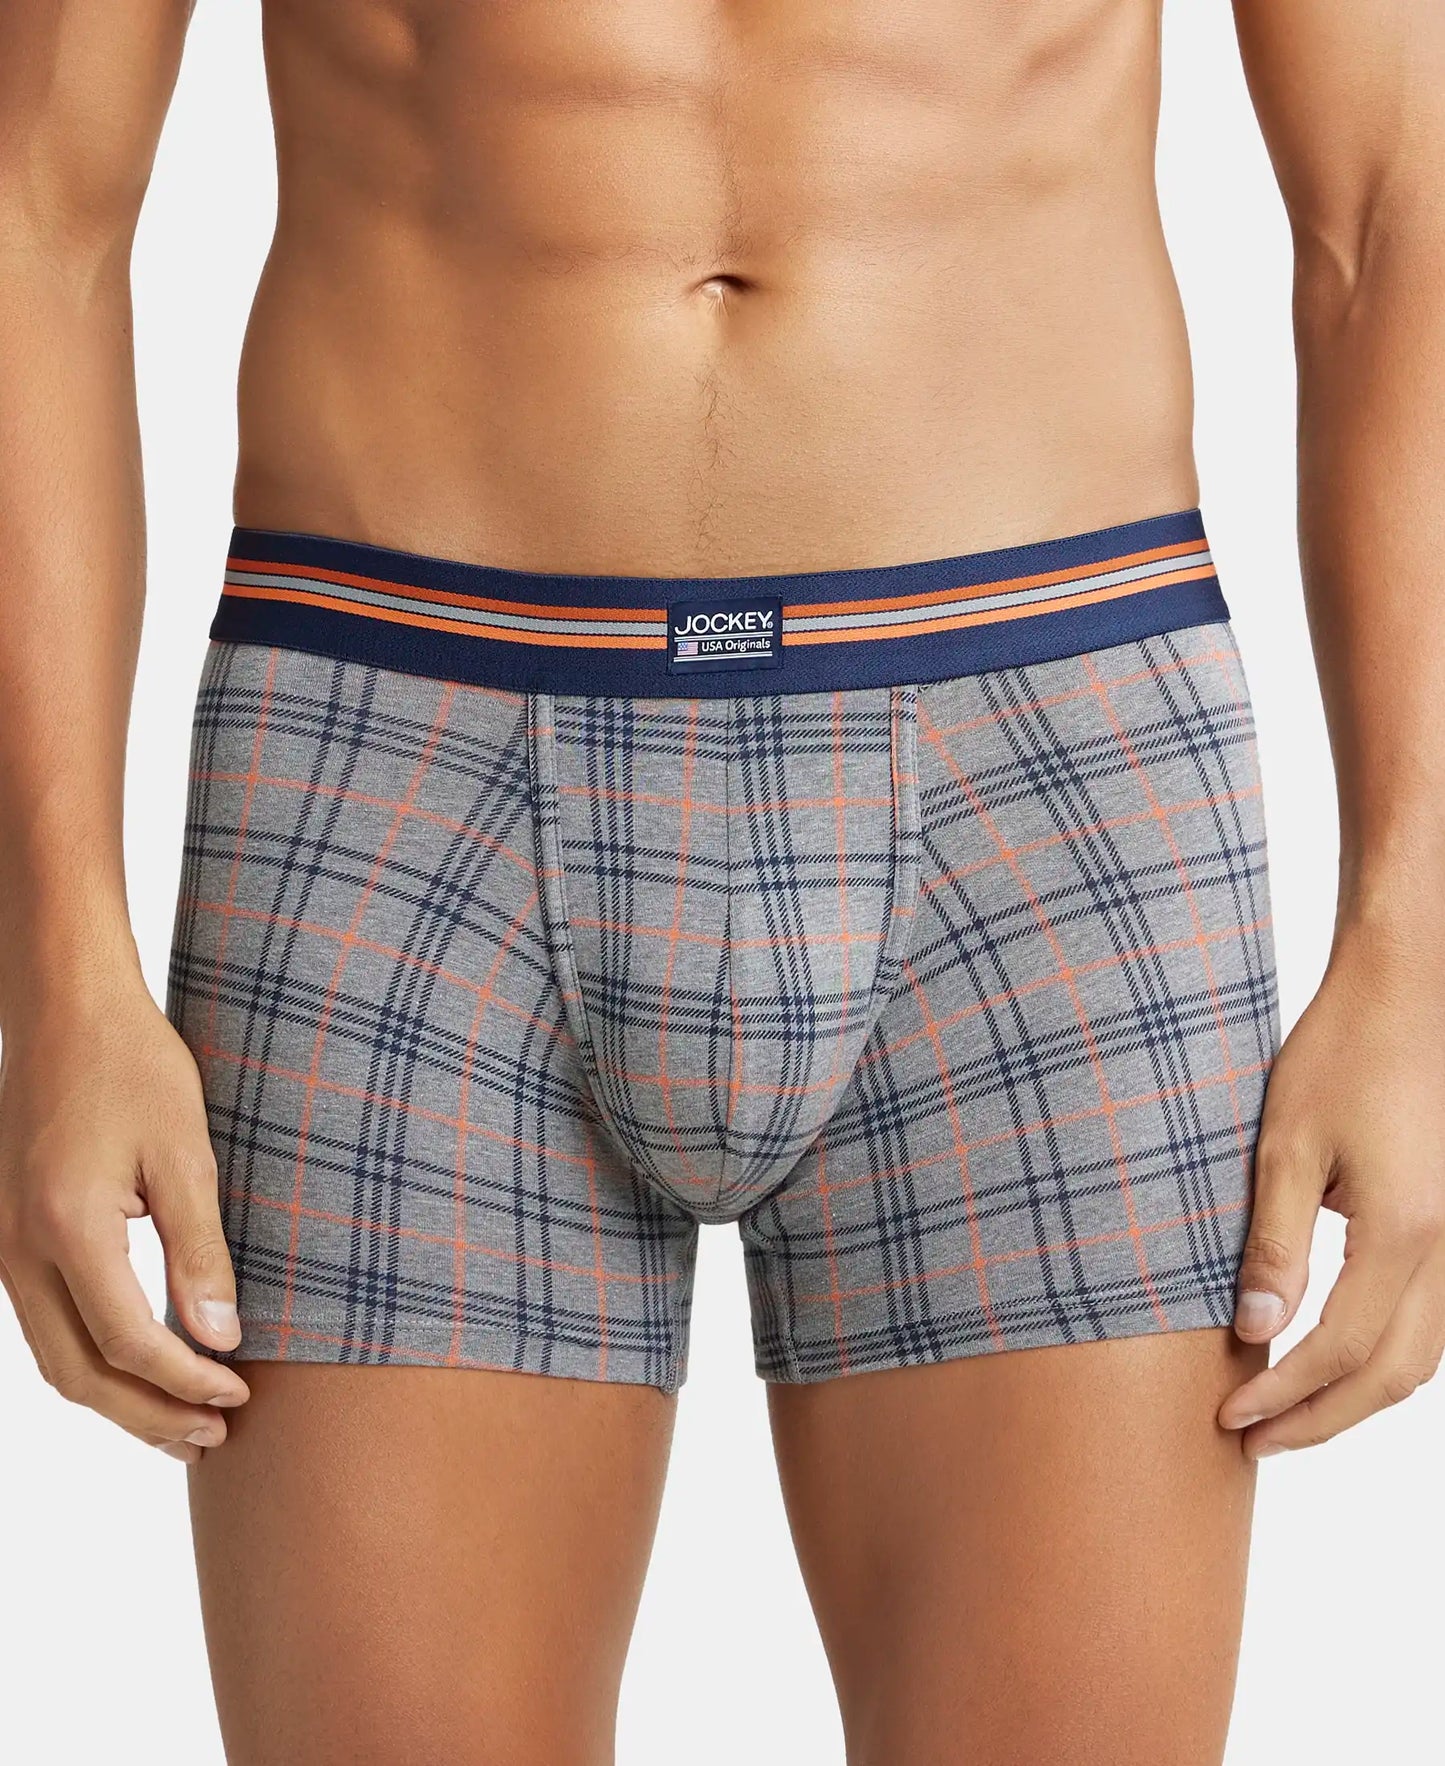 Super Combed Cotton Elastane Printed Trunk with Ultrasoft Waistband - Navy Print-9